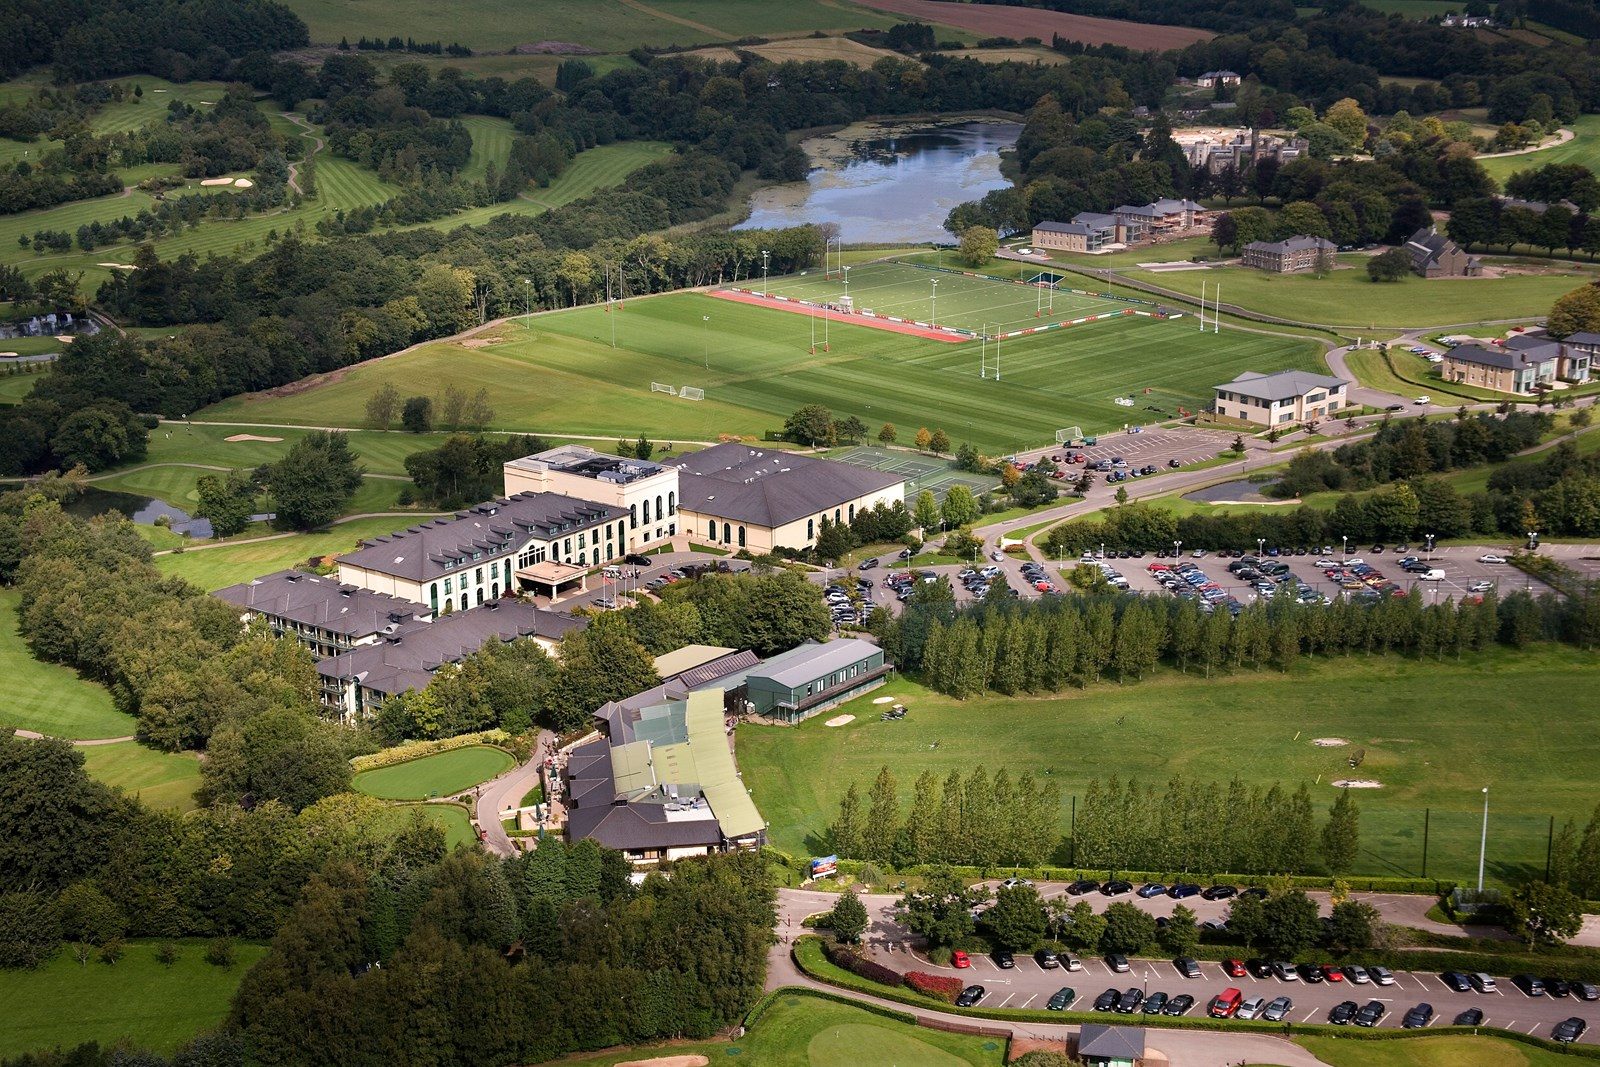 Wales Corporate Travel Conferences, Vale Resort, Hensol, Wales